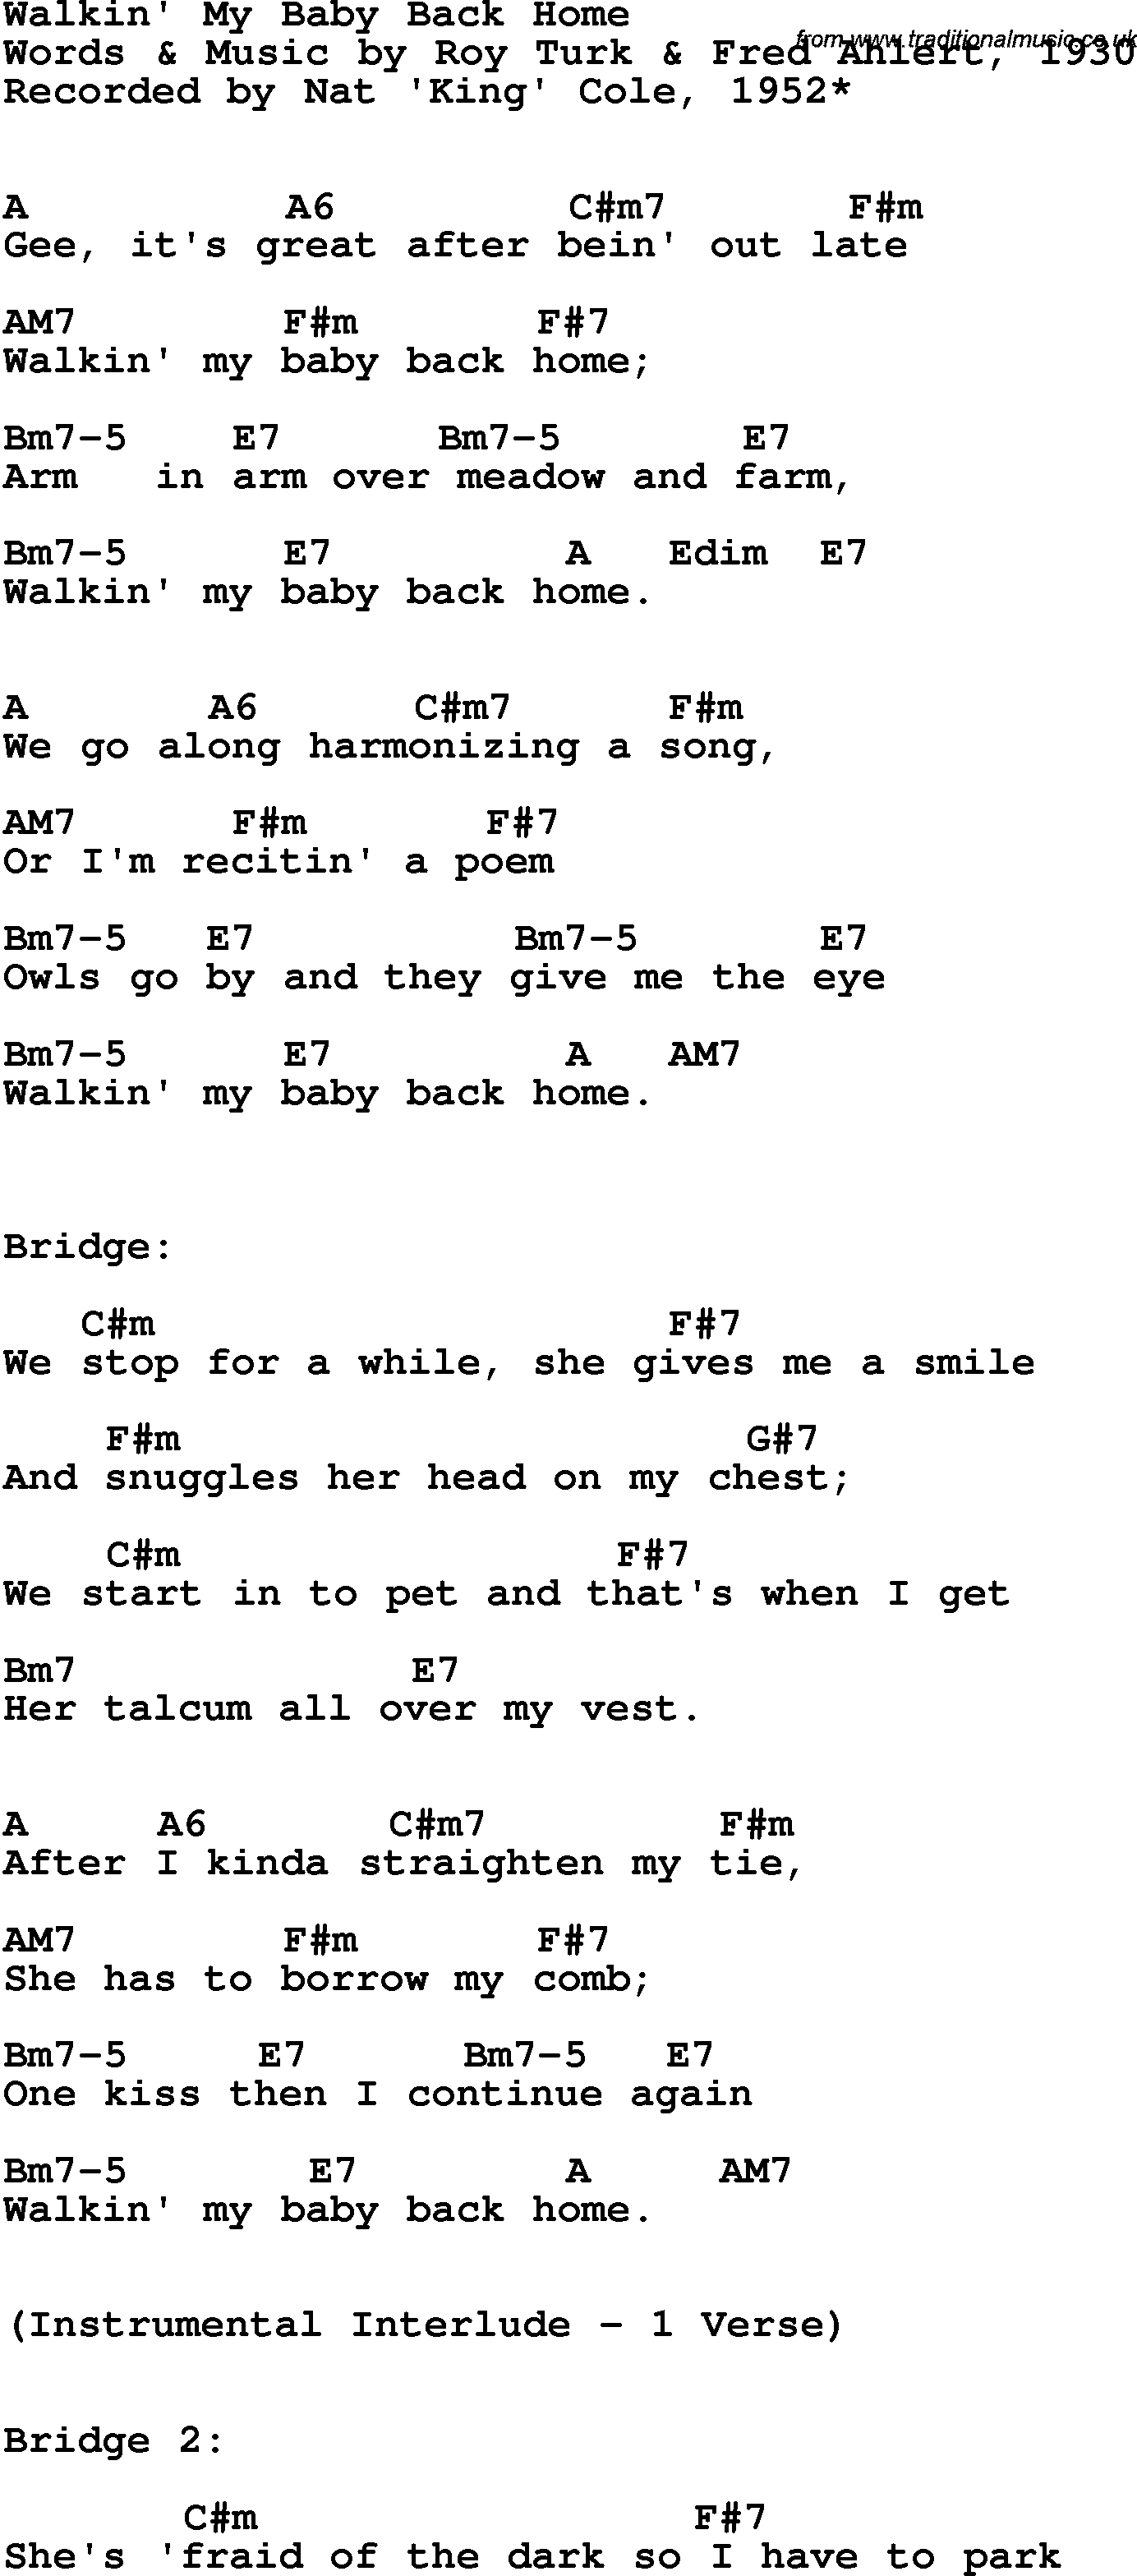 Song Lyrics with guitar chords for Walkin' My Baby Back Home - Nat 'king' Cole, 1952